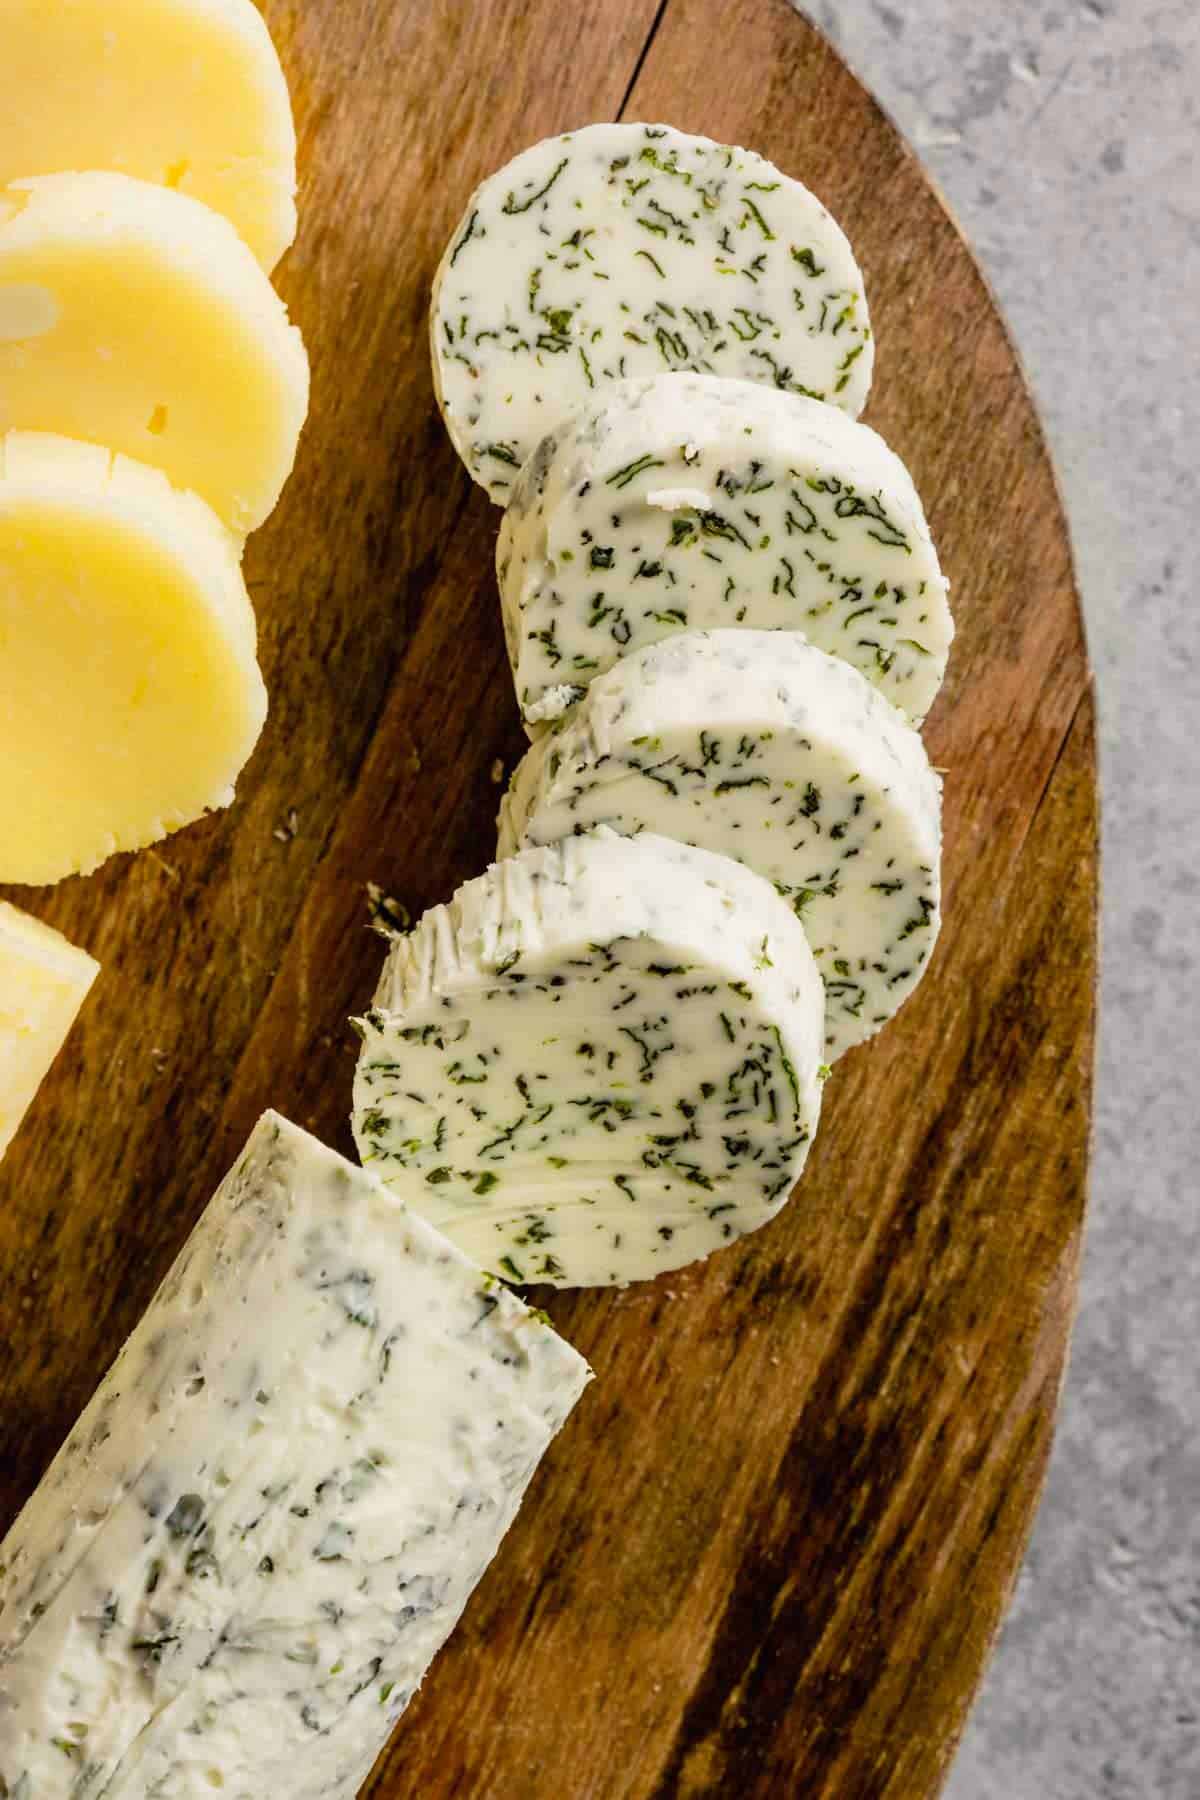 Top down photo of a roll of garlic and herb compound butter sliced on a wooden cutting board.